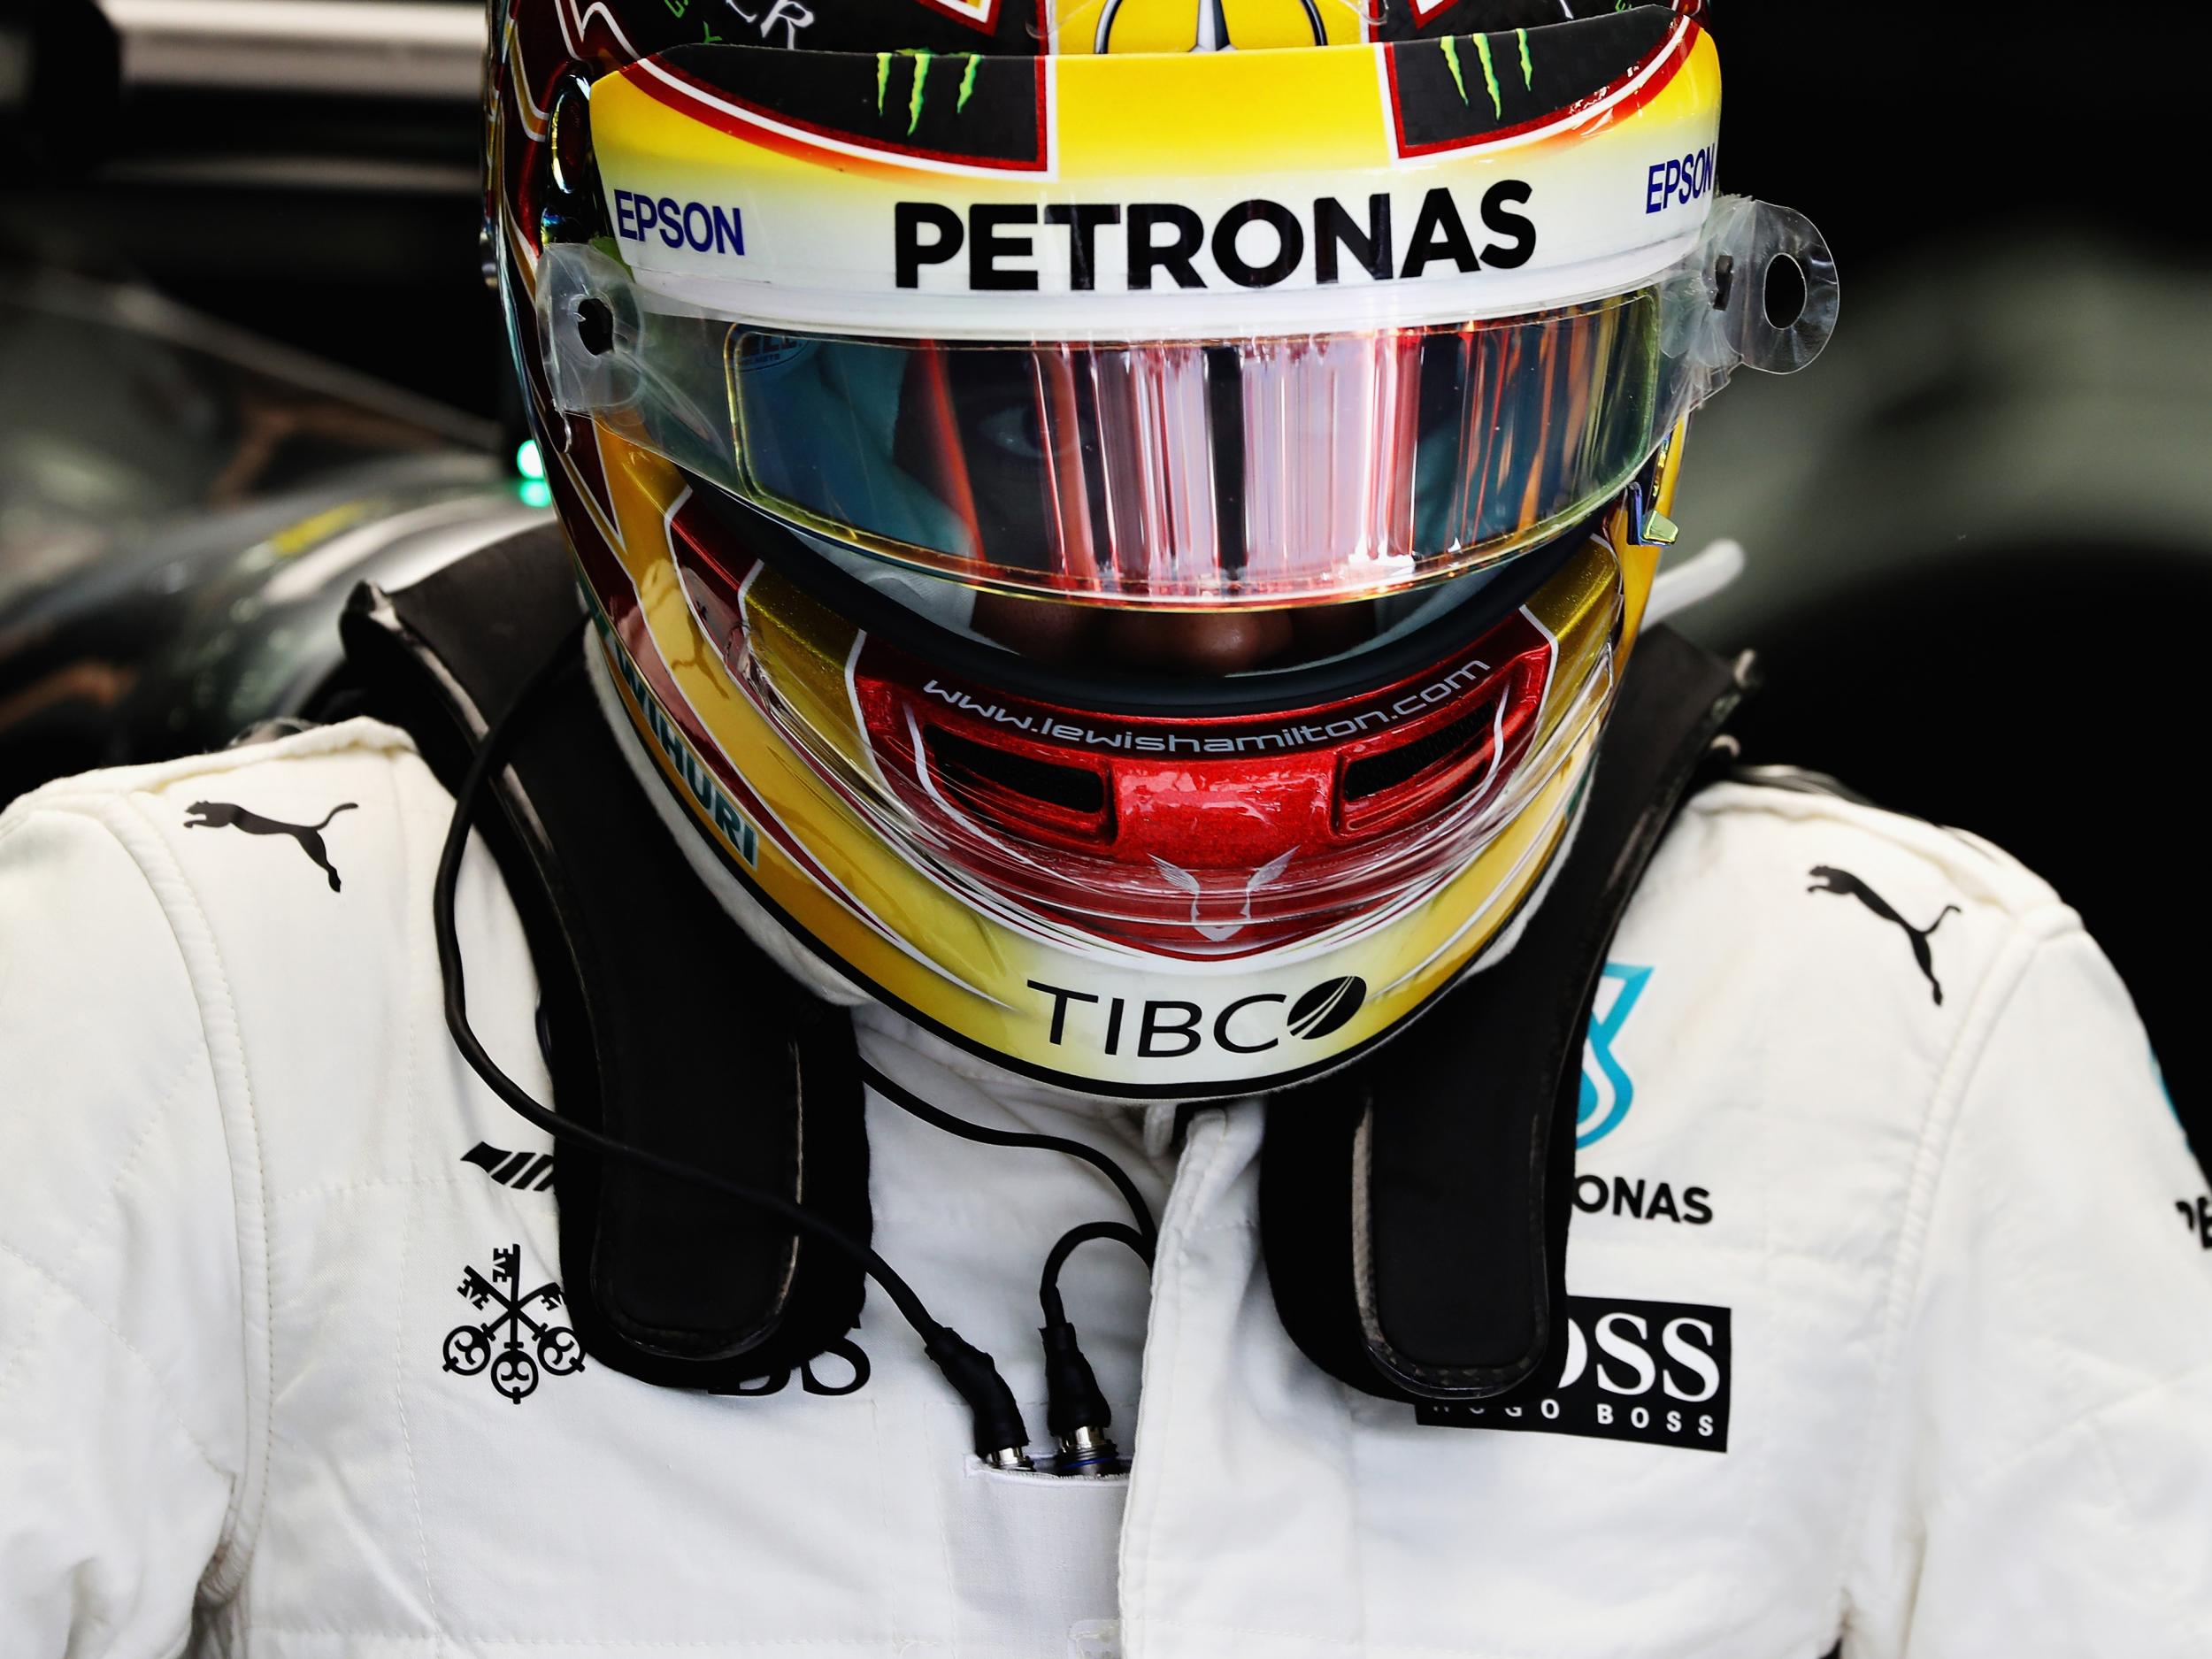 Hamilton could not help but be disappointed with his second-place finish